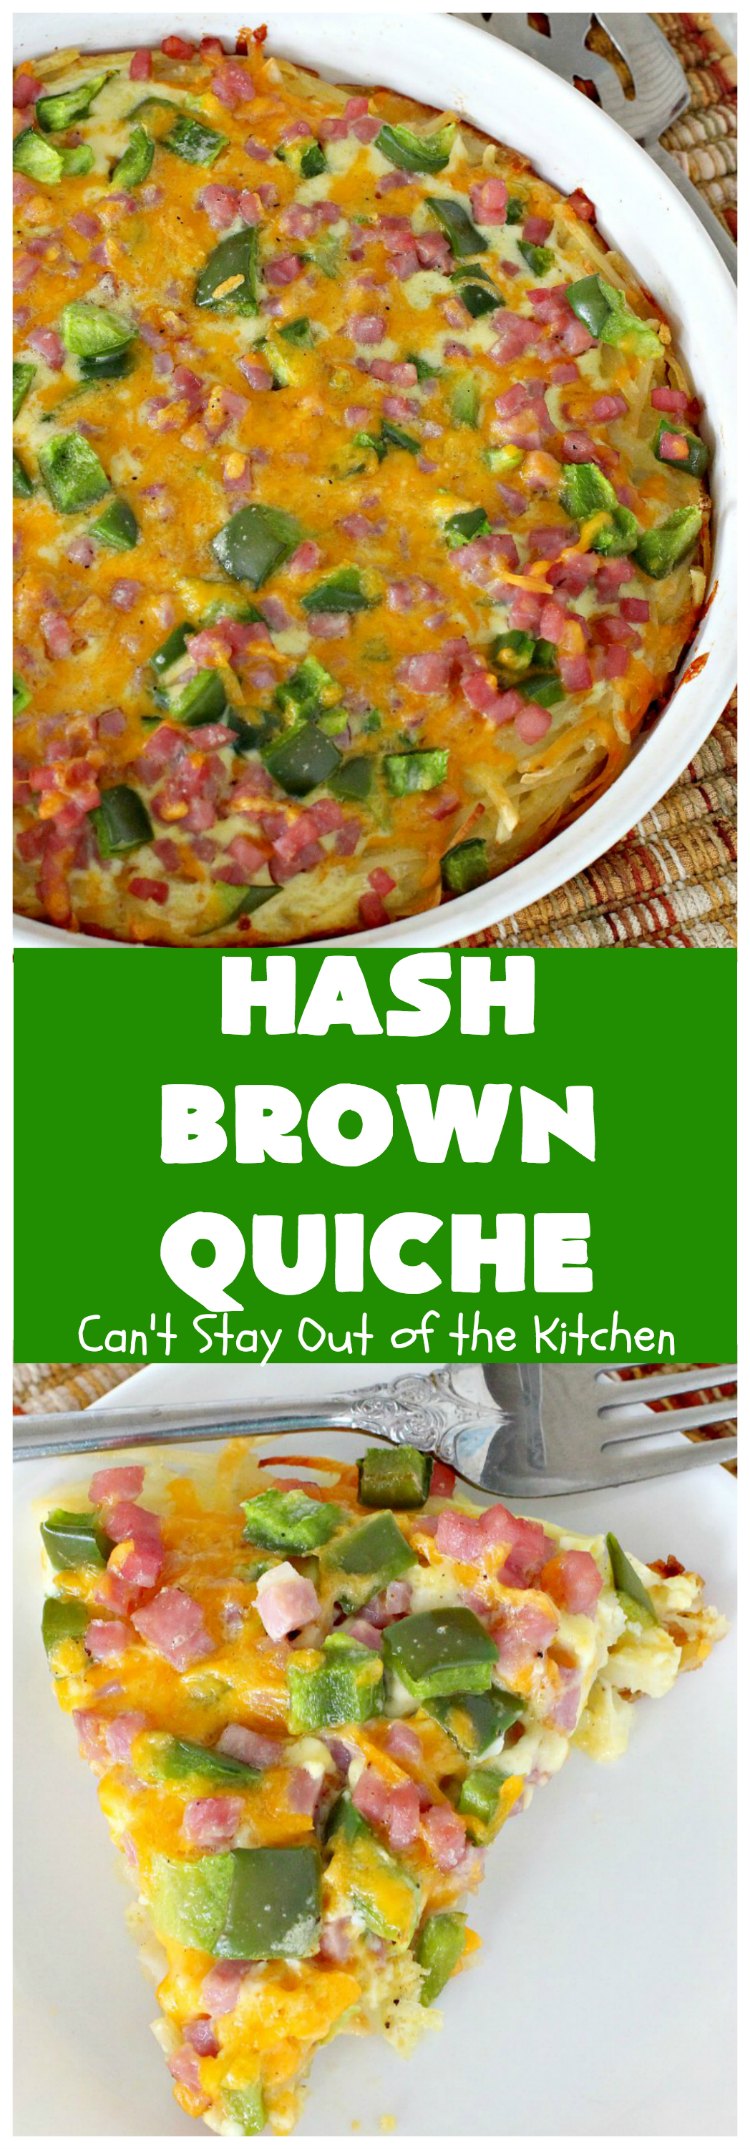 Hash Brown Quiche | Can't Stay Out of the Kitchen | this easy #quiche #recipe uses a #hashbrown crust. It's terrific for a #holiday #breakfast. #ham #cheddarcheese #glutenfree #pork #glutenfreequiche  #HolidayBreakfast